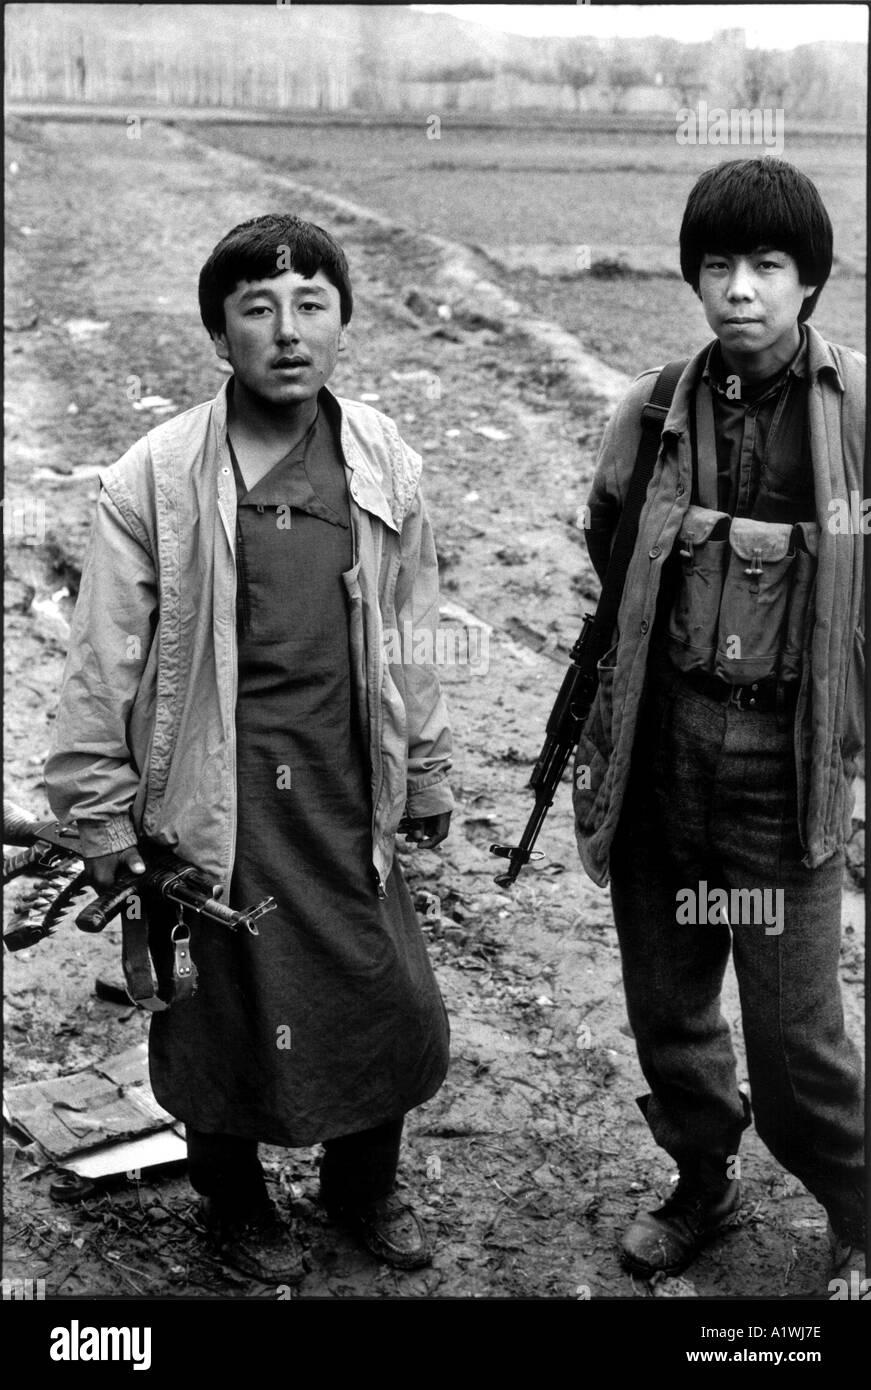 AFGHANISTAN KABUL 1996 YOUNG SOLDIERS FIGHTING THE TALIBAN, GULAM 16 AND ZIA 15 Stock Photo